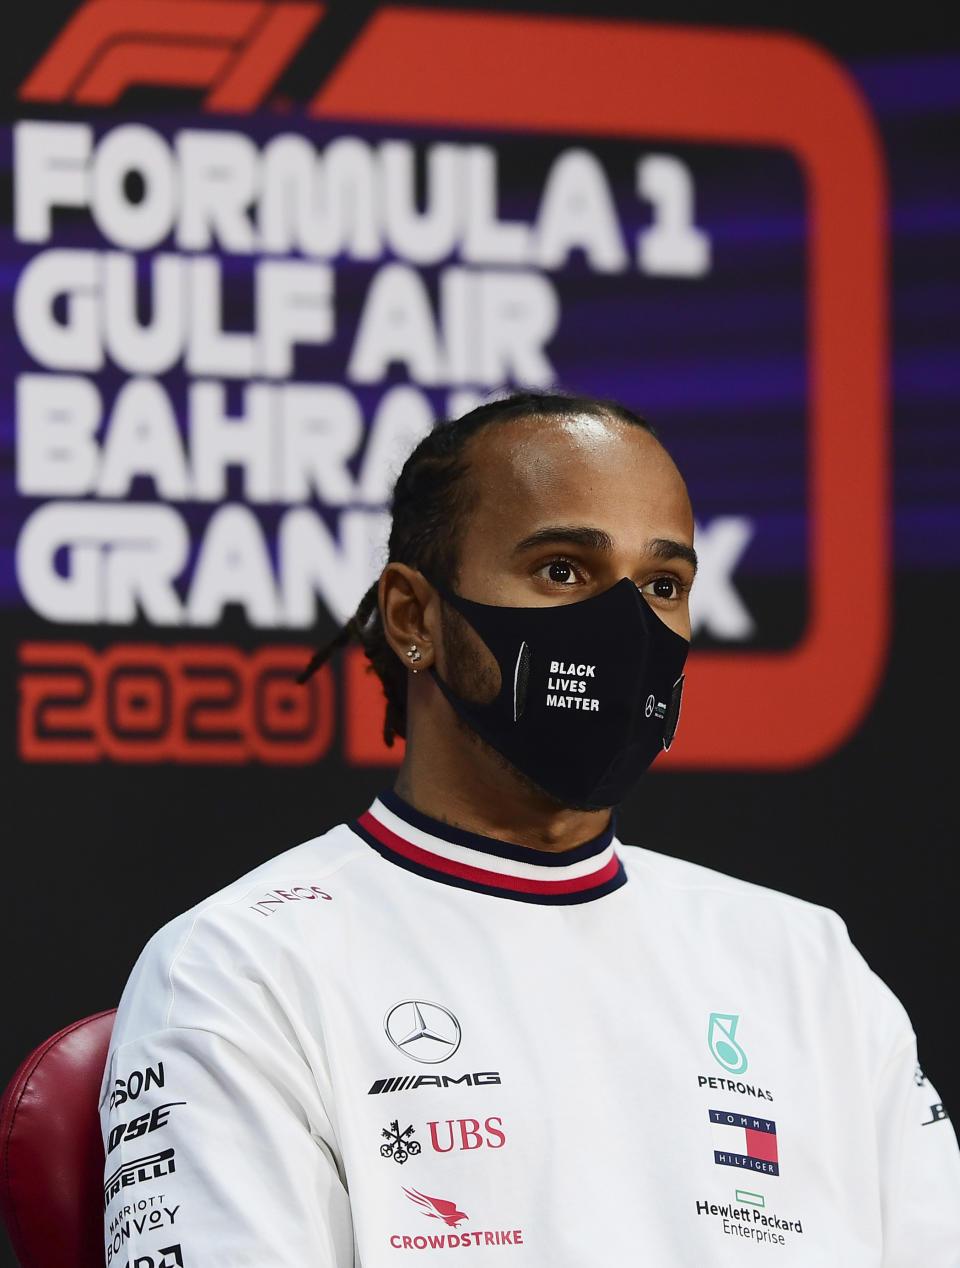 FILE - In this Thursday, Nov. 26, 2020 file photo Mercedes driver Lewis Hamilton of Britain participates in a media conference prior to the Bahrain Formula One Grand Prix at the International Circuit in Sakhir, Bahrain. The Bahrain Formula One Grand Prix will take place on Sunday. World champion Lewis Hamilton tested positive for COVID-19 and will miss the Sakhir Grand Prix this weekend, his Mercedes-AMG Petronas F1 Team said Tuesday Dec. 1, 2020. (Mario Renzi, Pool via AP, File)